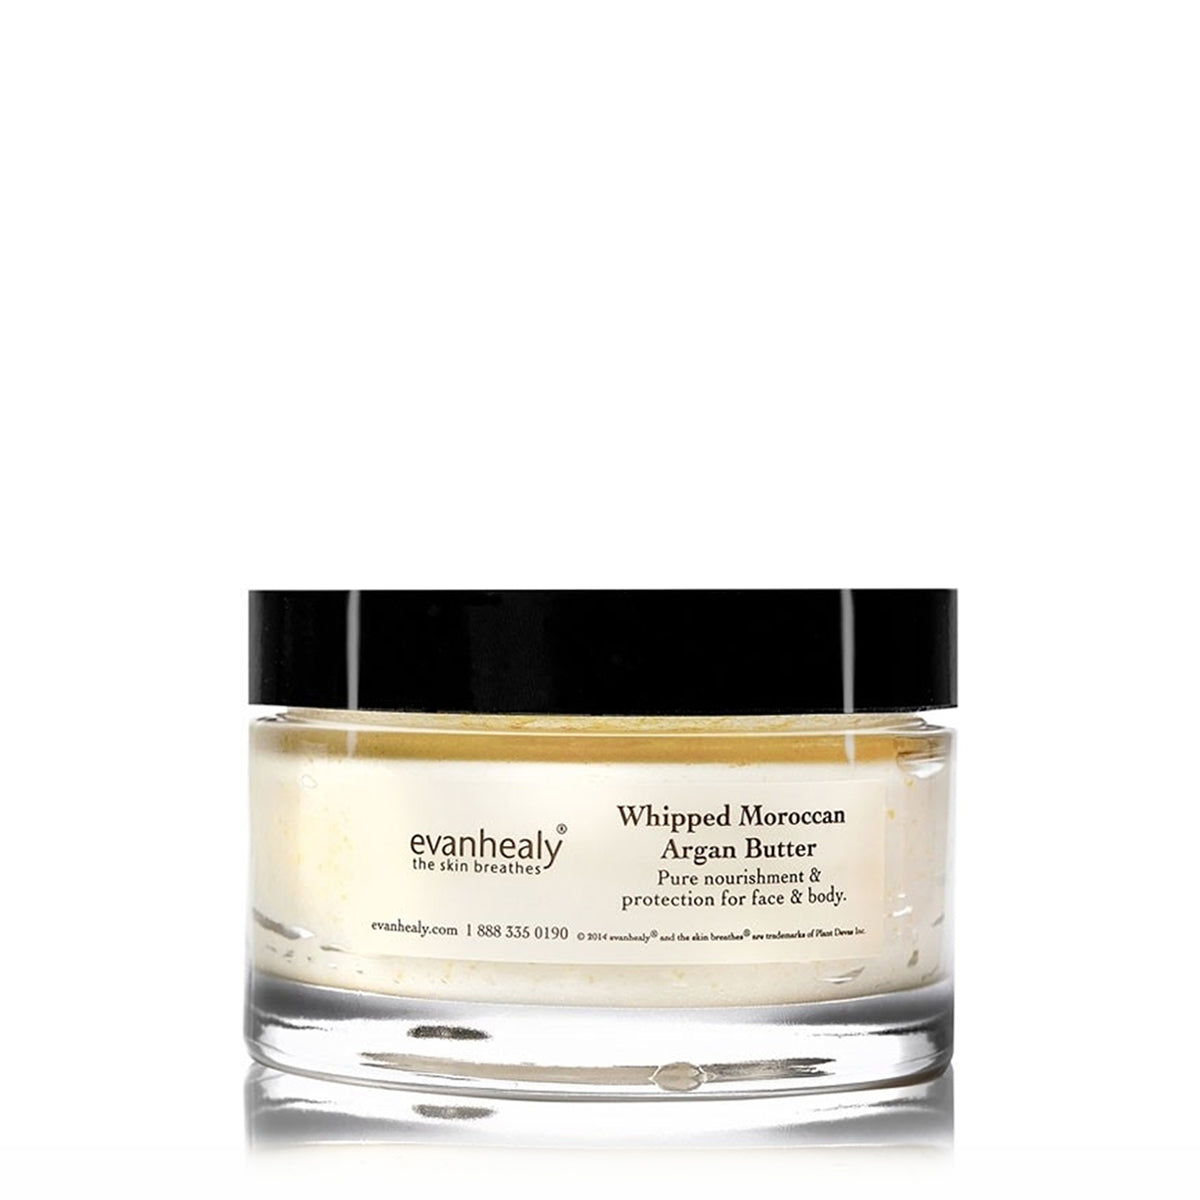 evanhealy whipped moroccan argan body butter with shea